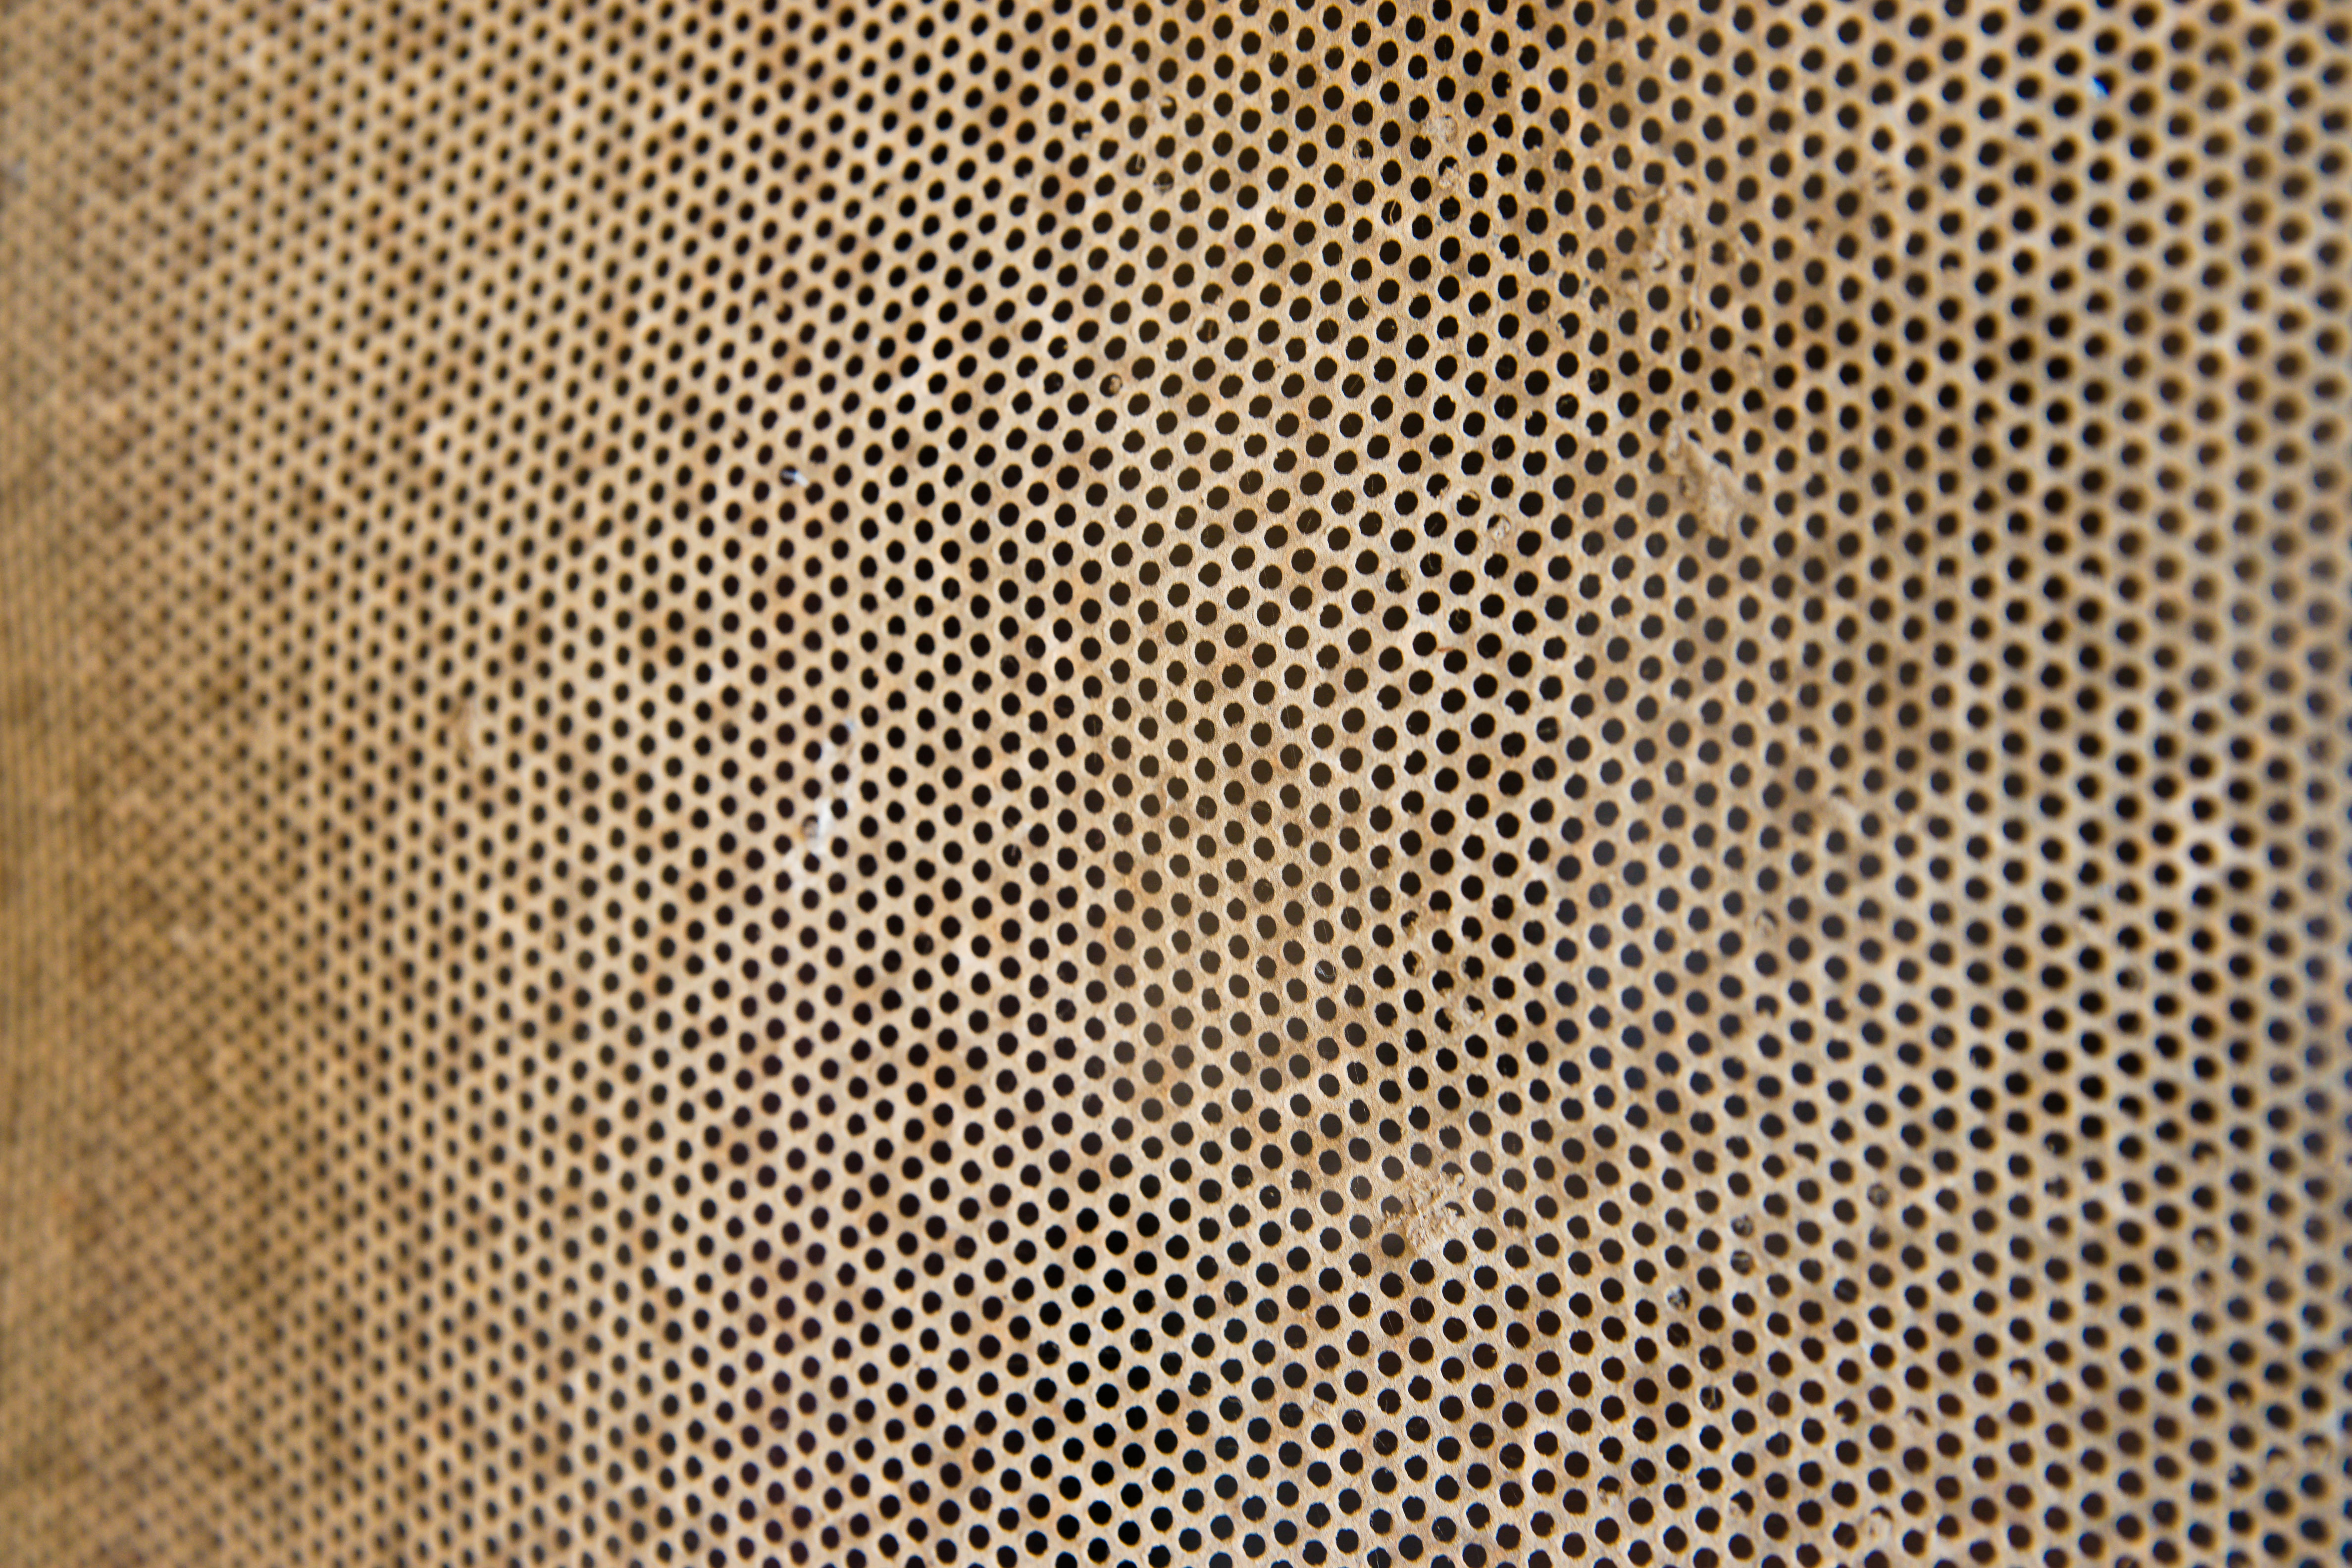 old metal mesh screen background texture